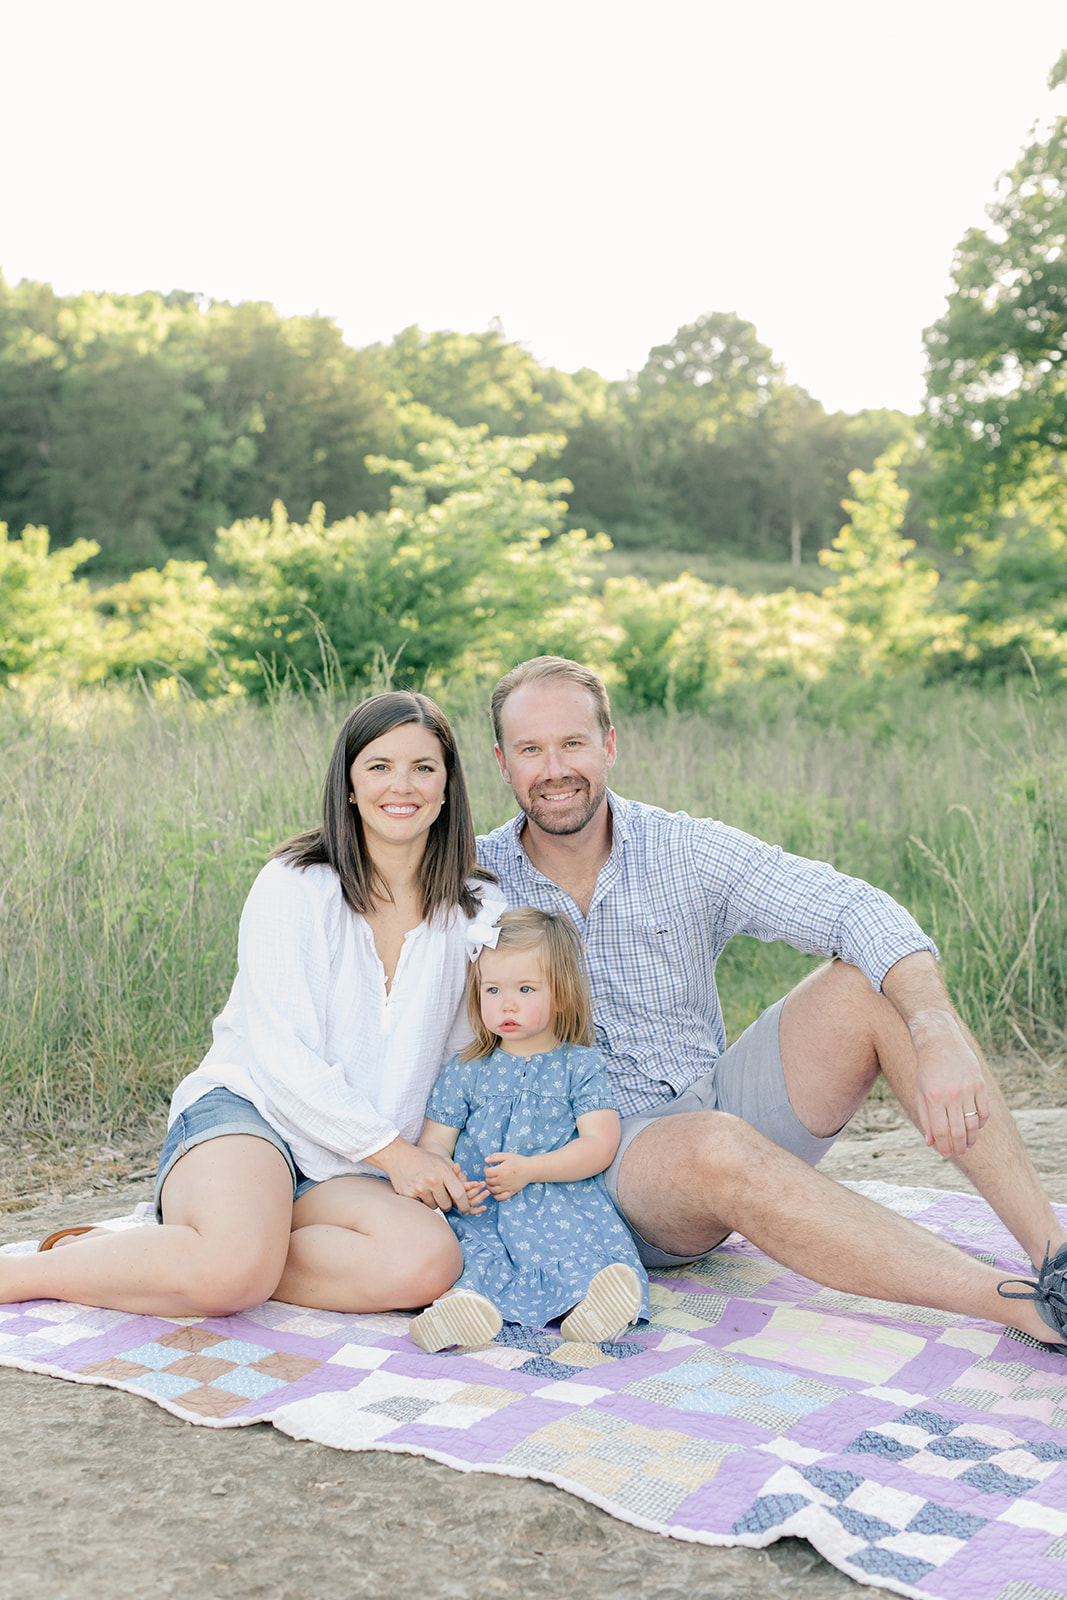 outdoor family photos for 2 year baby milestone session in nashville tennessee